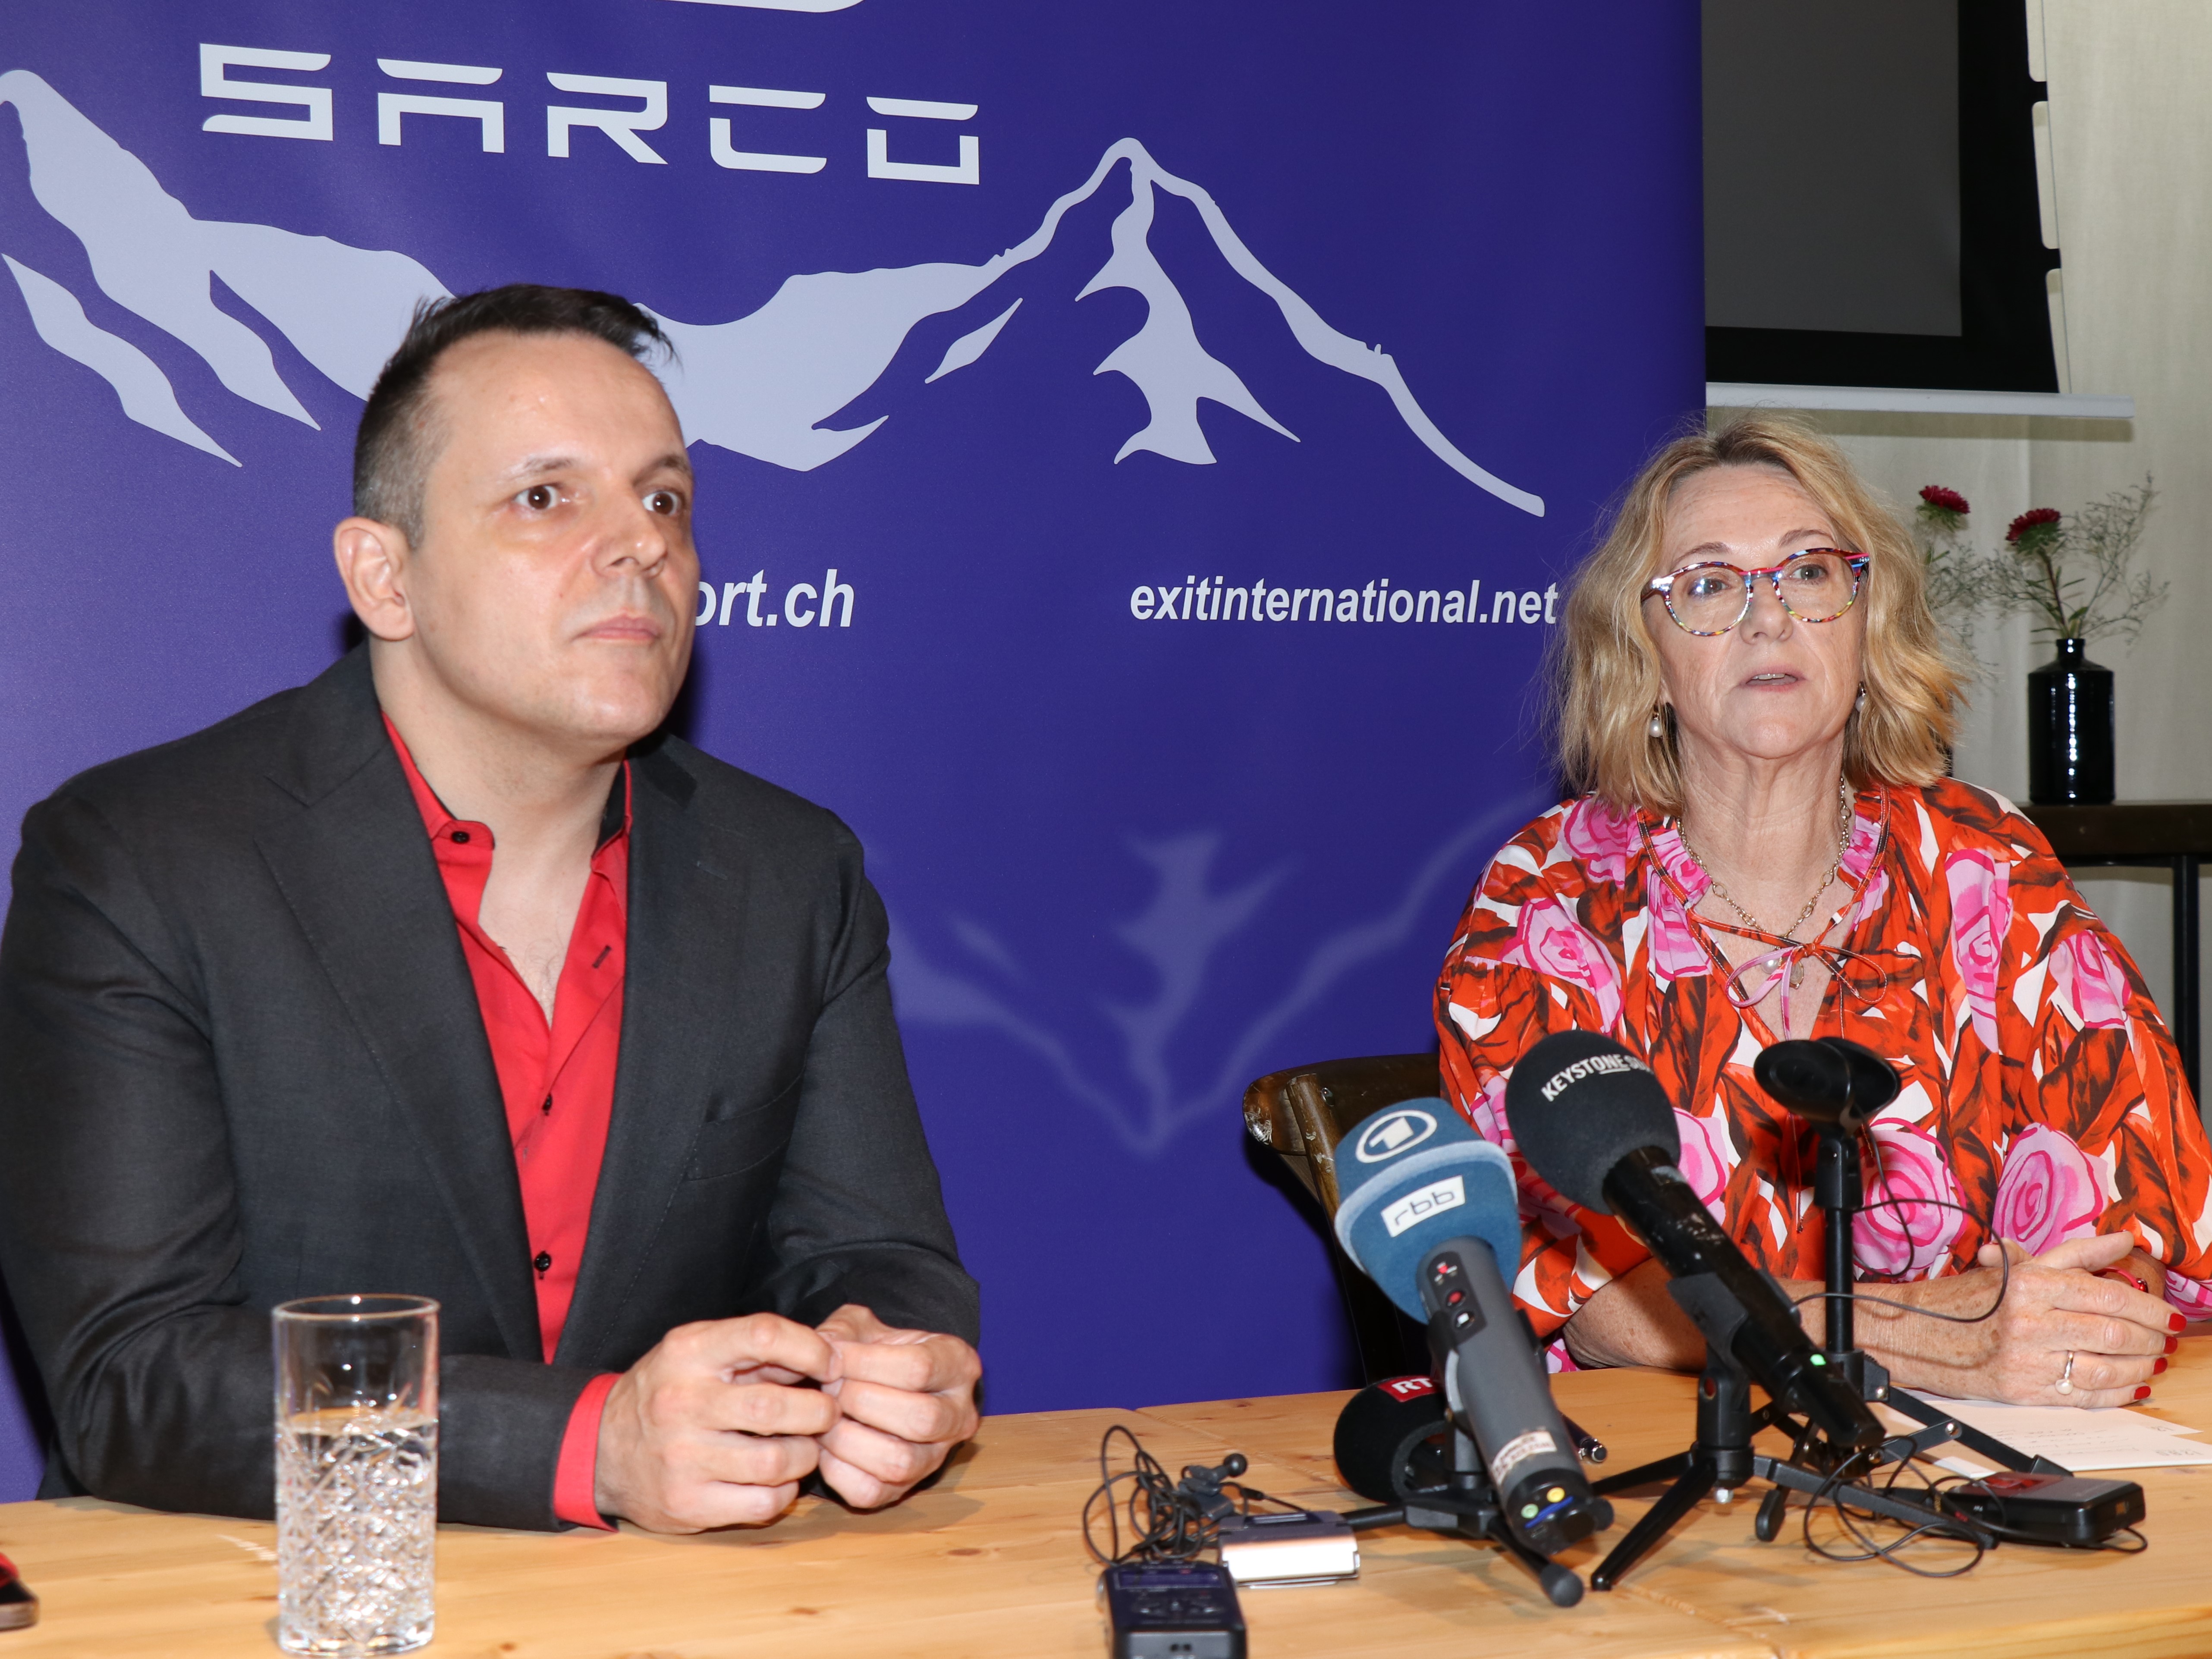 Fiona Stewart and Florian Willet from The Last Resort, at the press conference in Zurich. They believe Sarco offers the most peaceful death possible, without drugs or doctors.